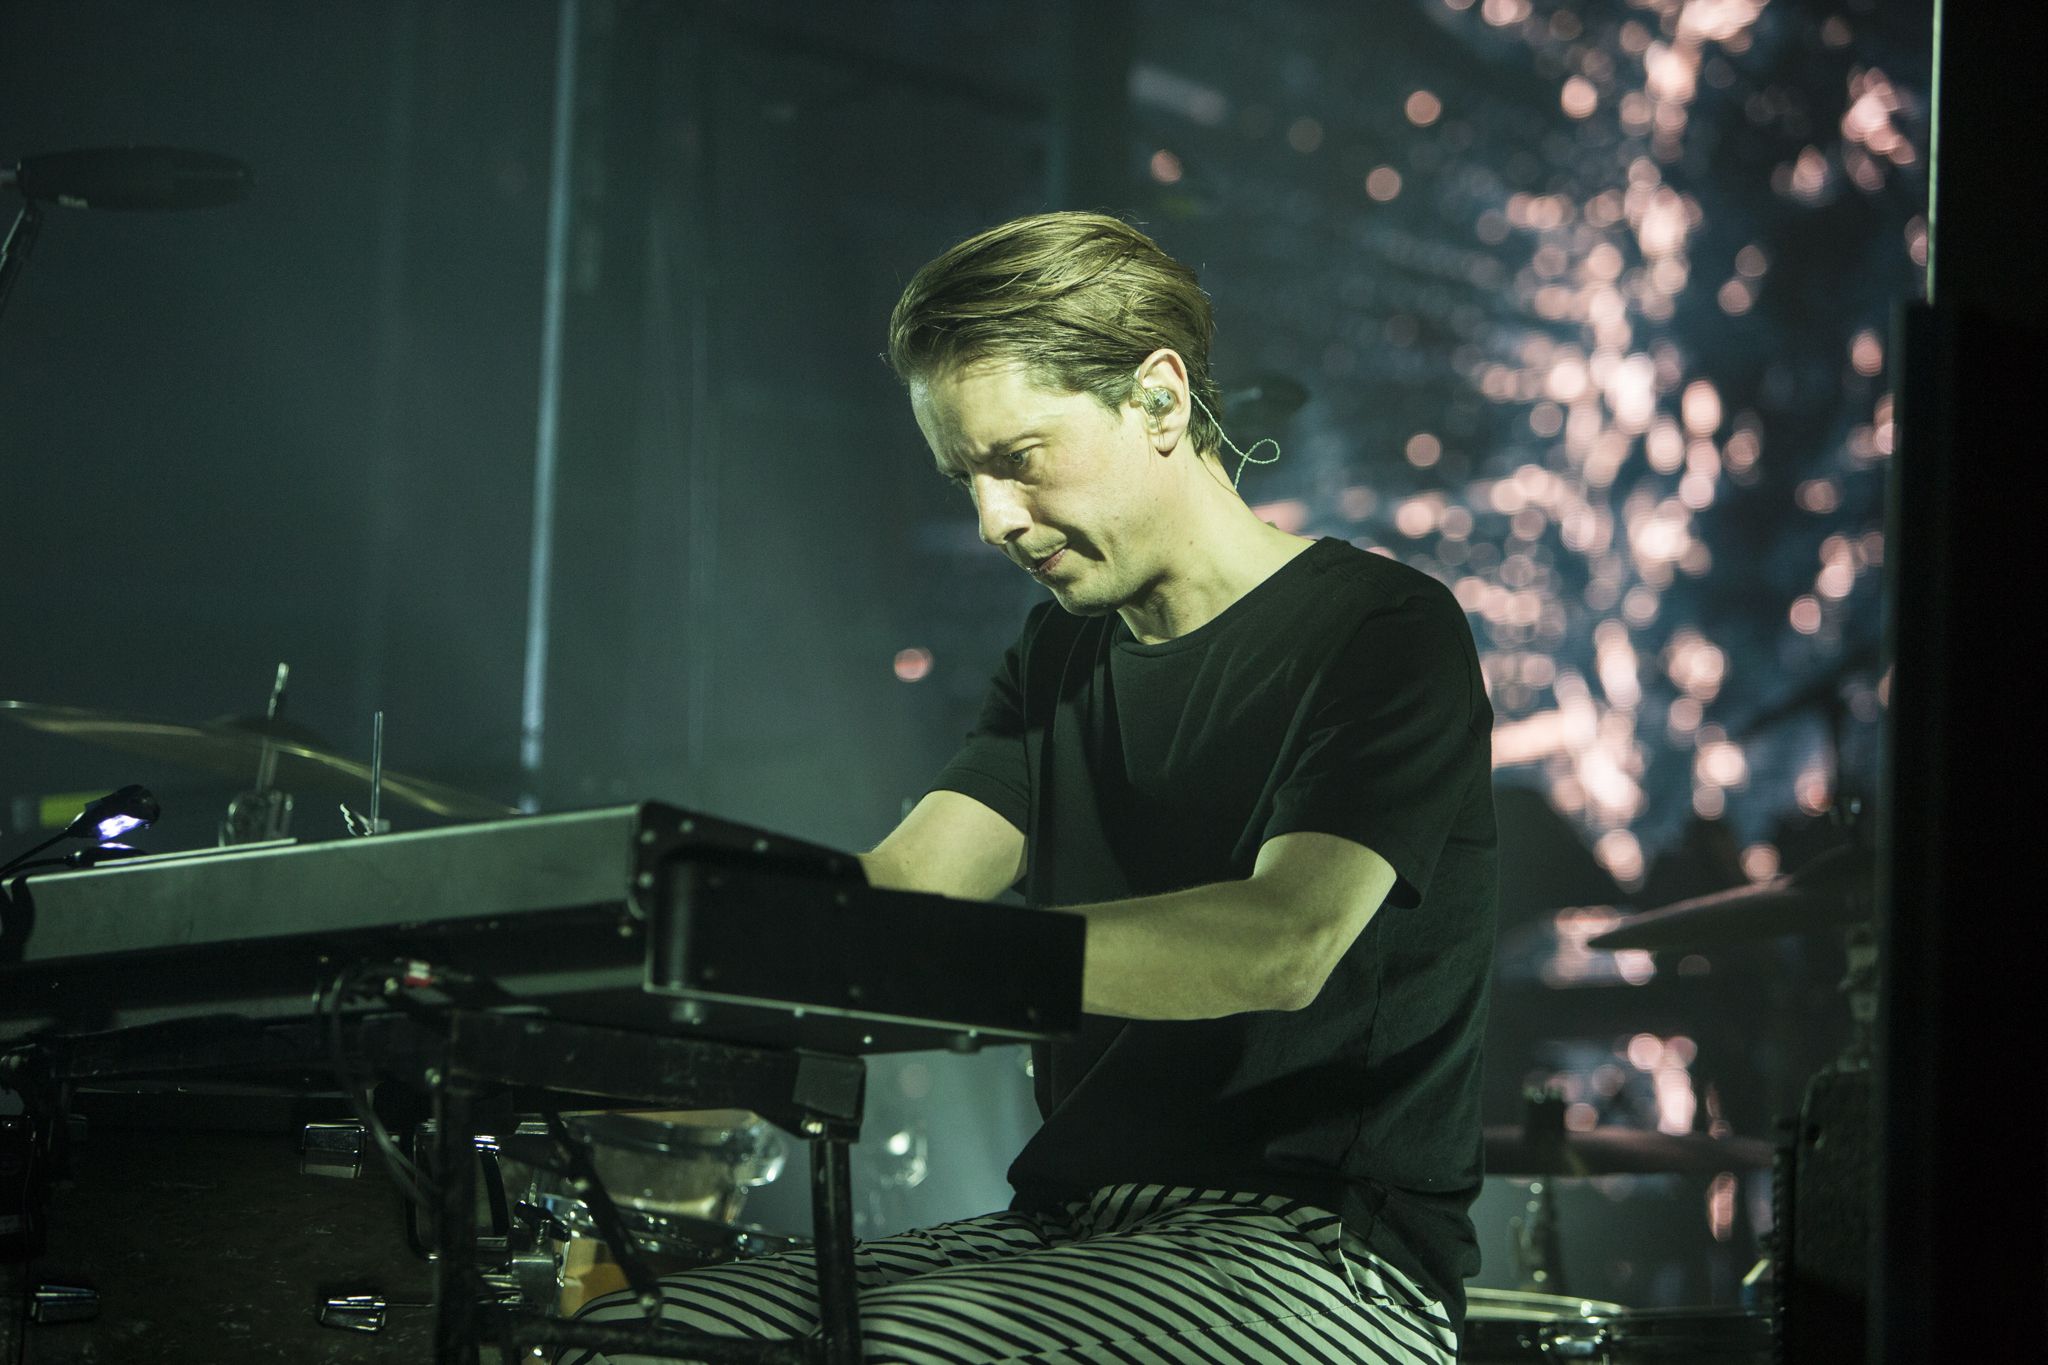 sigur ros 12 Live Review: Sigur Rós at the Fox Theater in Pomona (4/10)